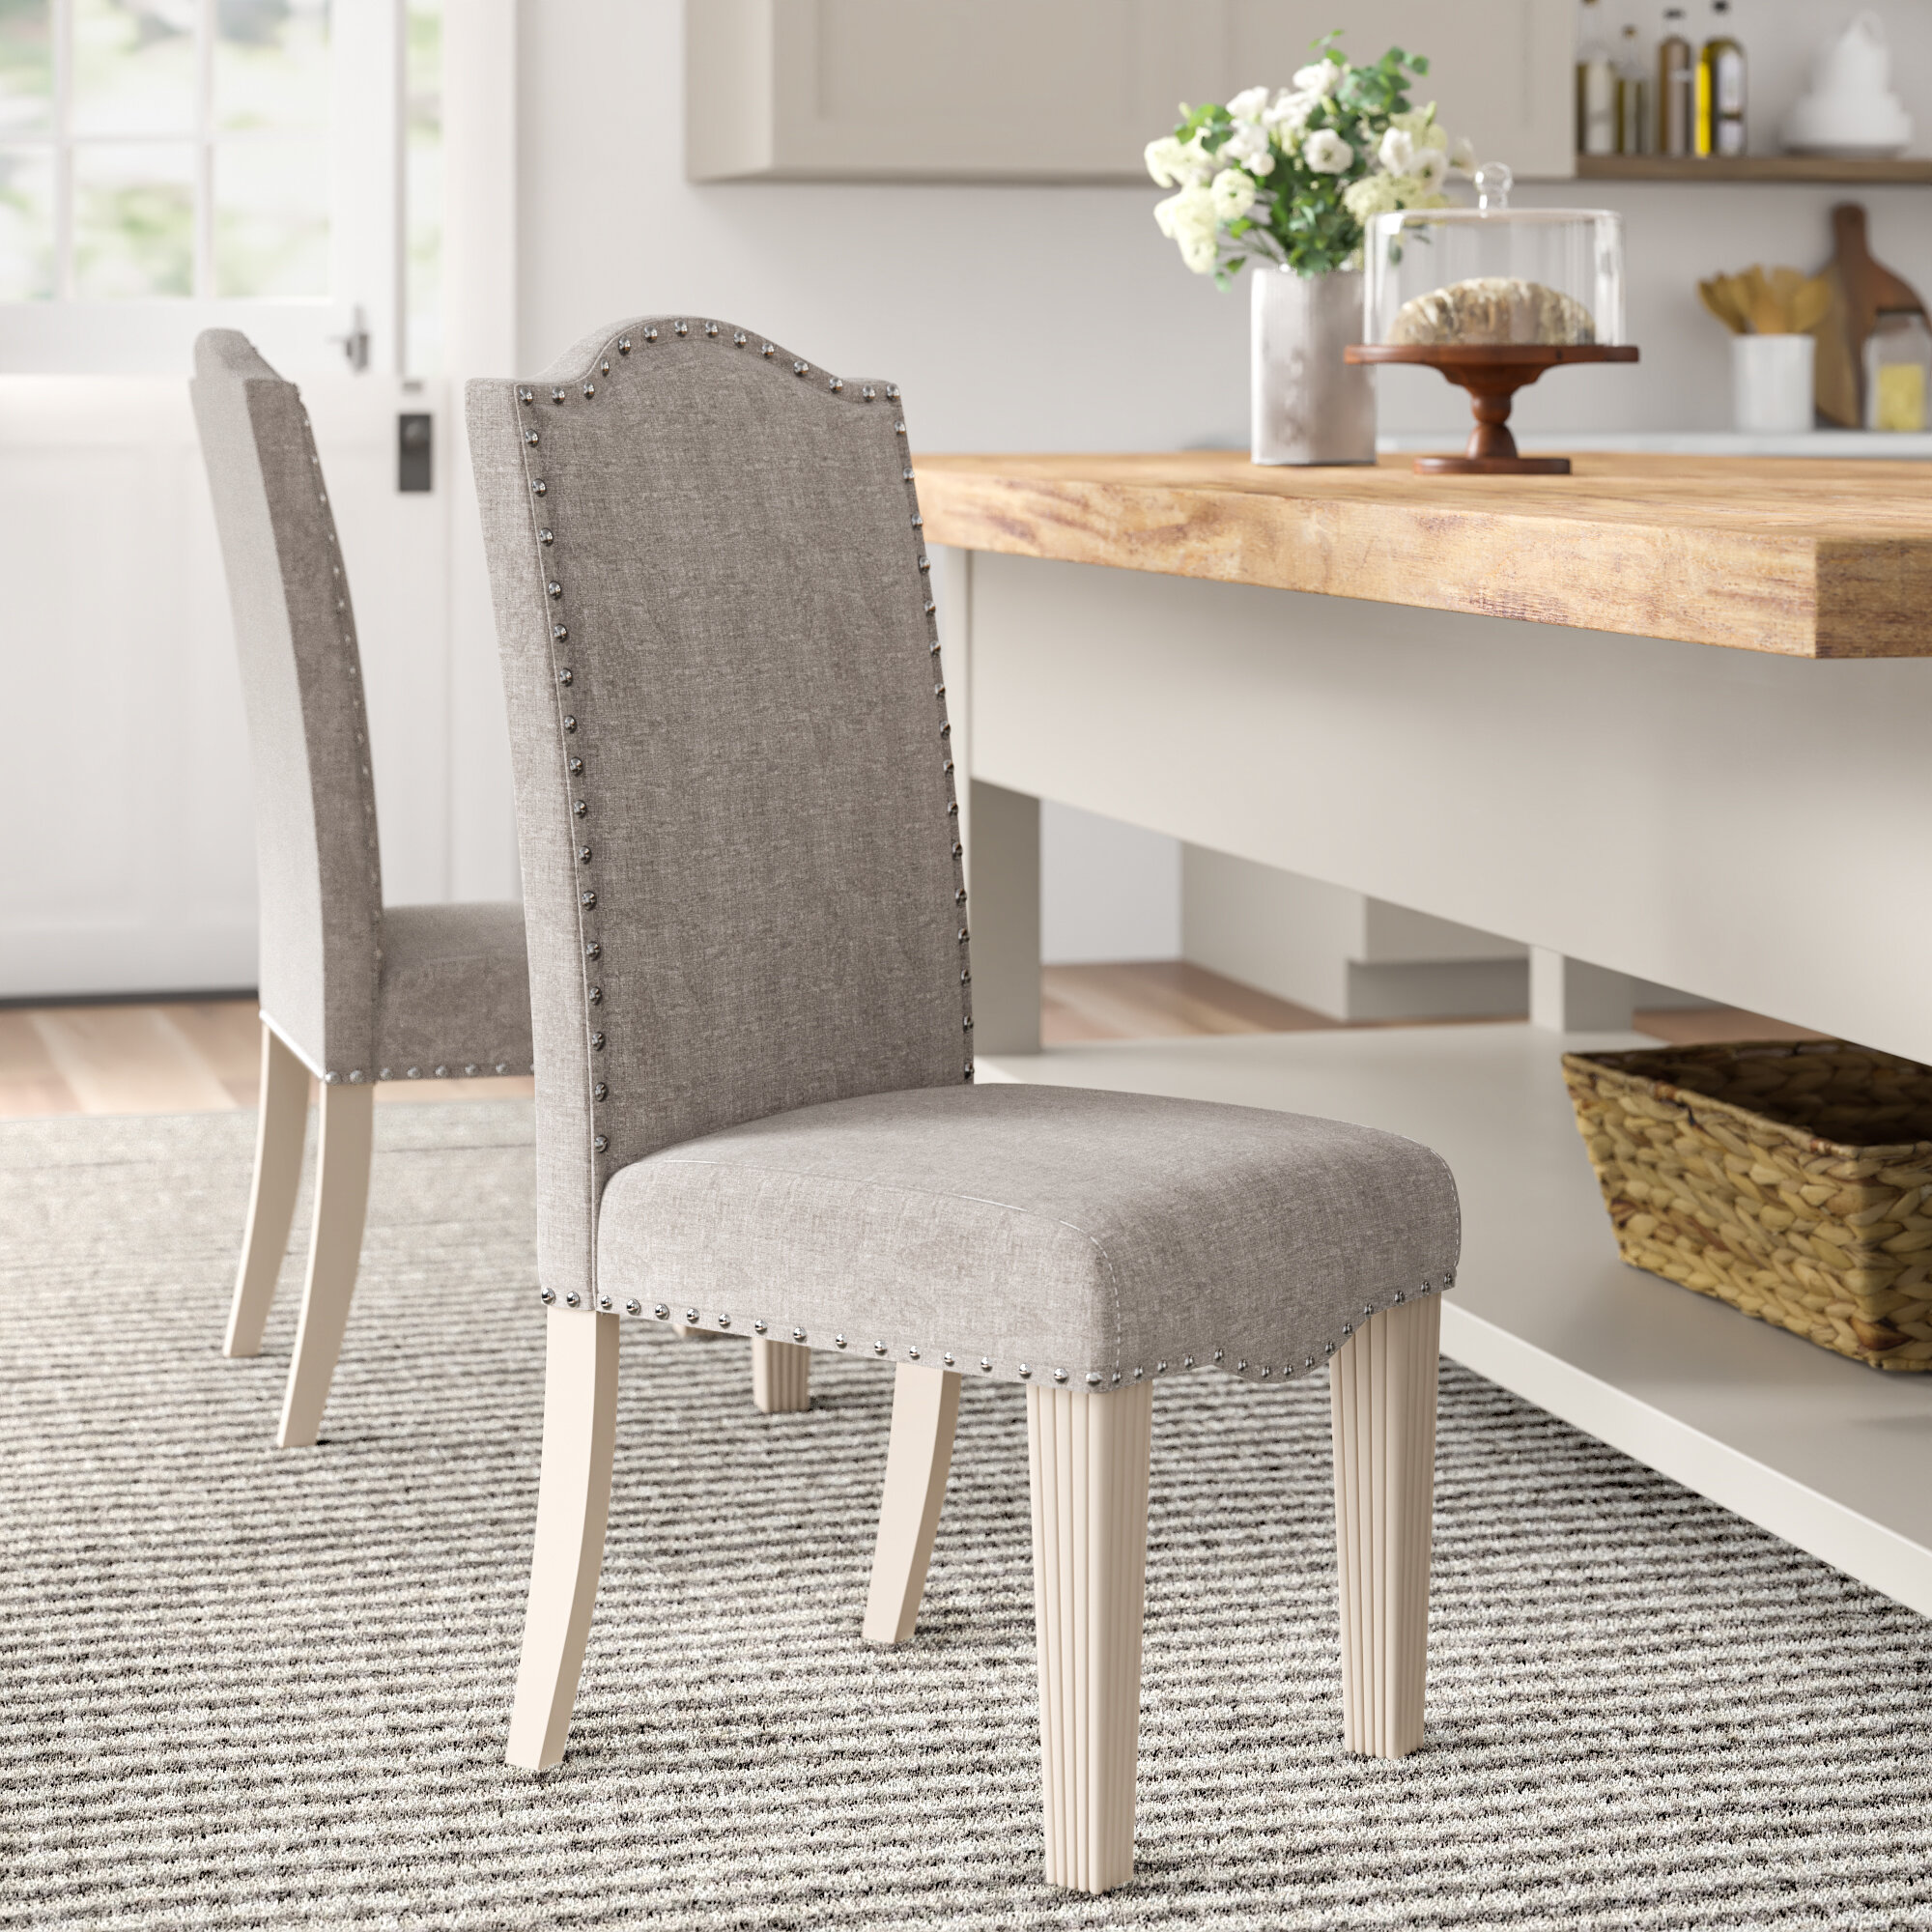 STONE GREY LINEN UPHOLSTERED DINING CHAIRS FRENCH STYLE BUTTON BACK LIMED LEGS 